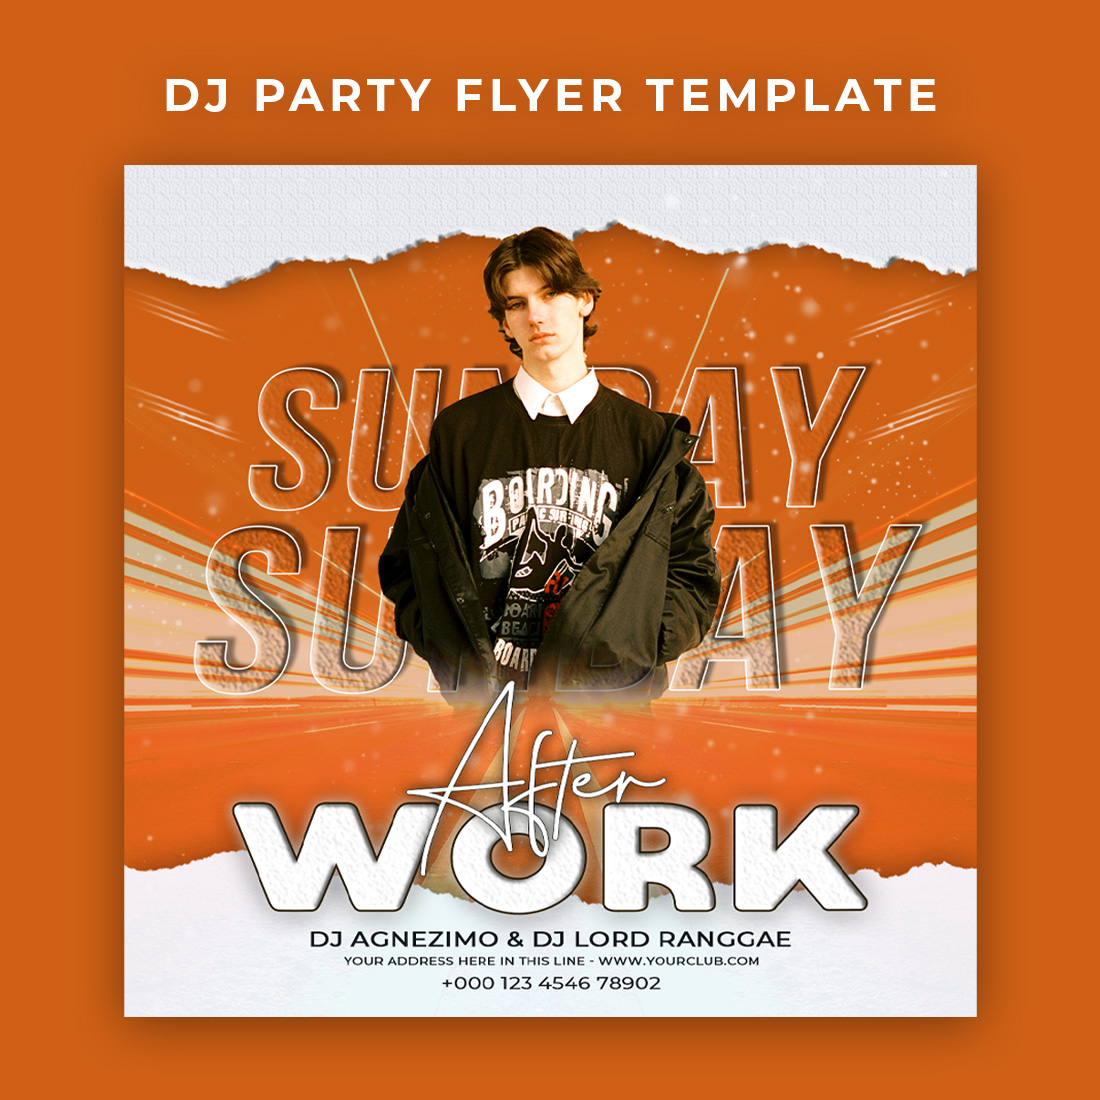 Flyer for a party with a man in a black jacket.